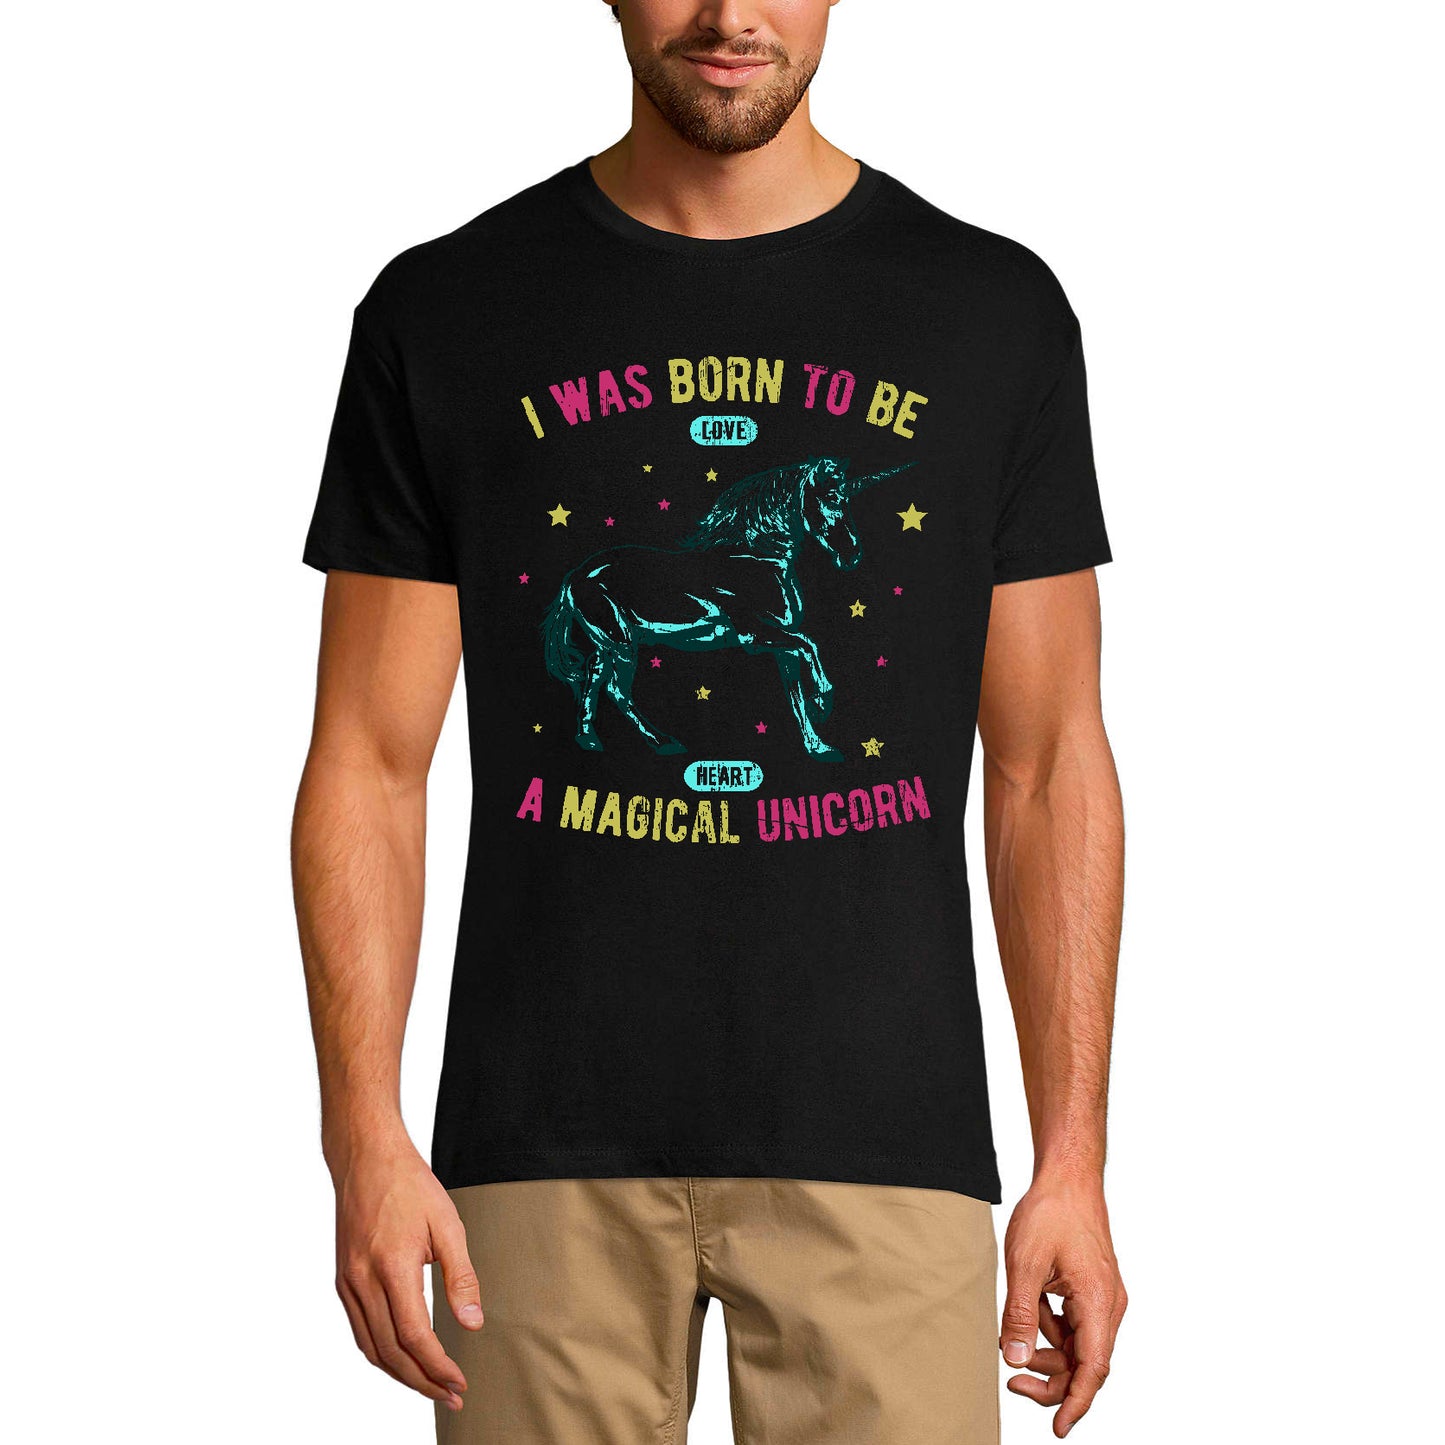 ULTRABASIC Men's Graphic T-Shirt I Was Born to be a Magical Unicorn - Funny Shirt